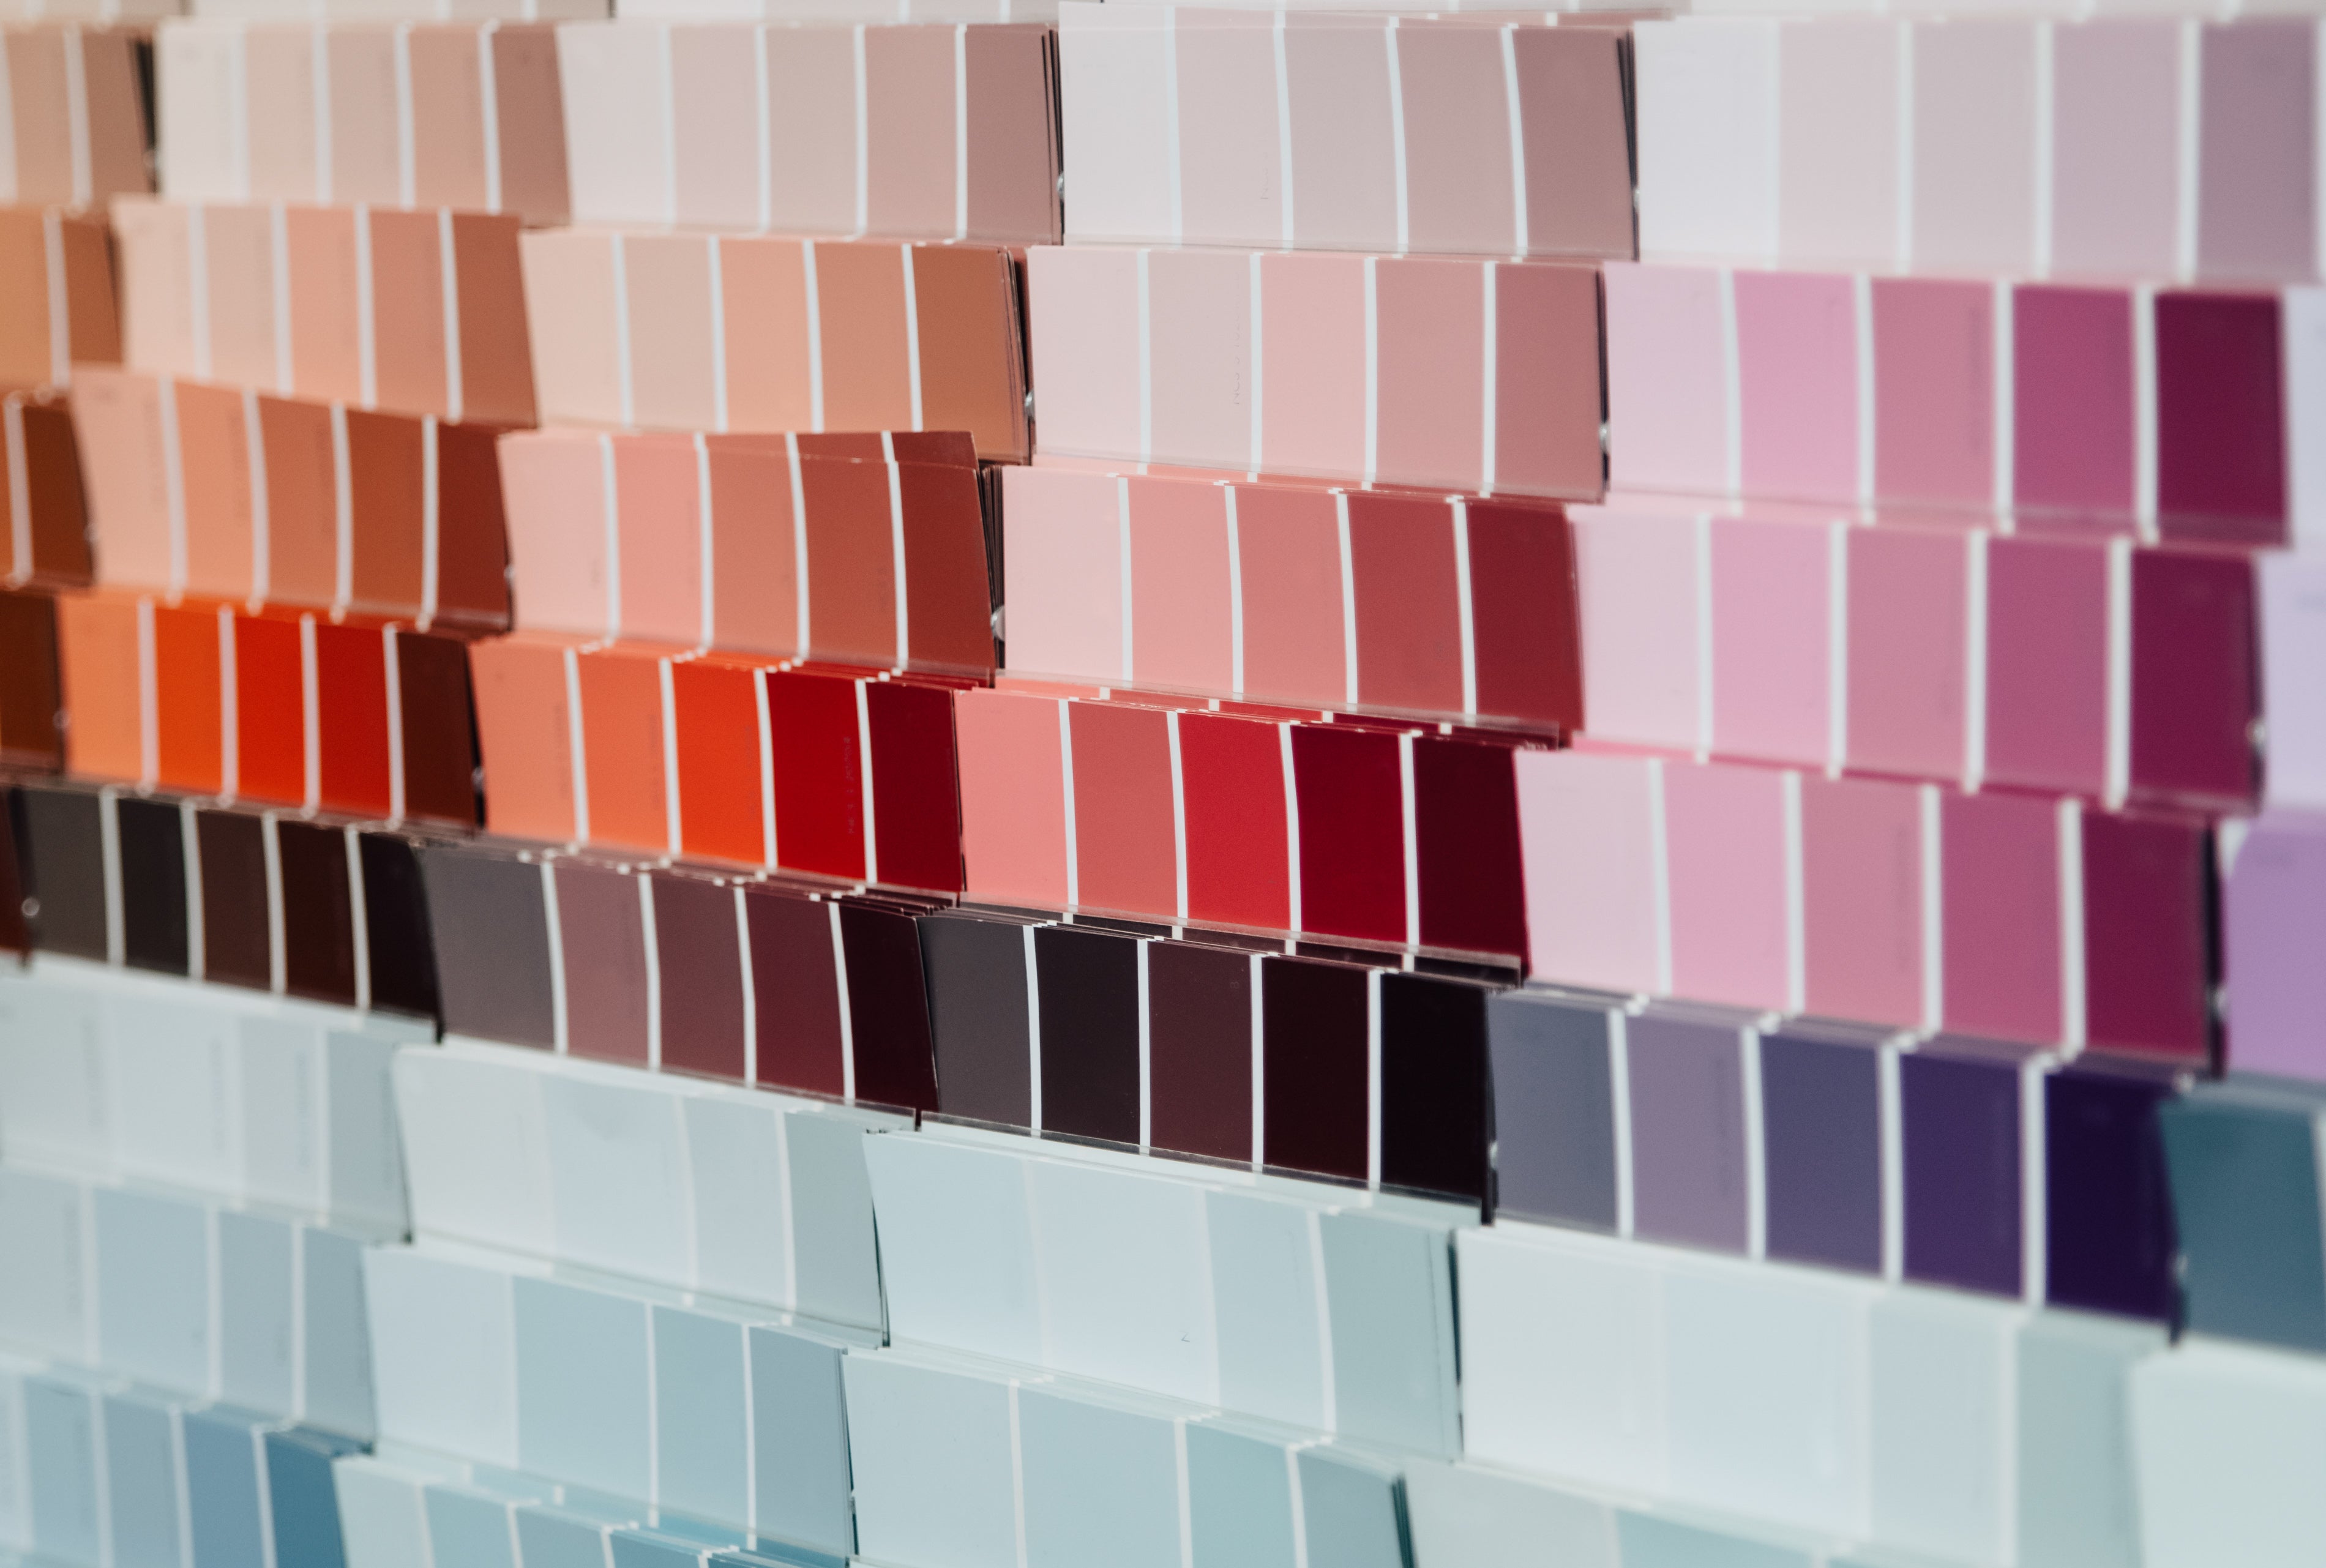 paint sample swatches organized by color